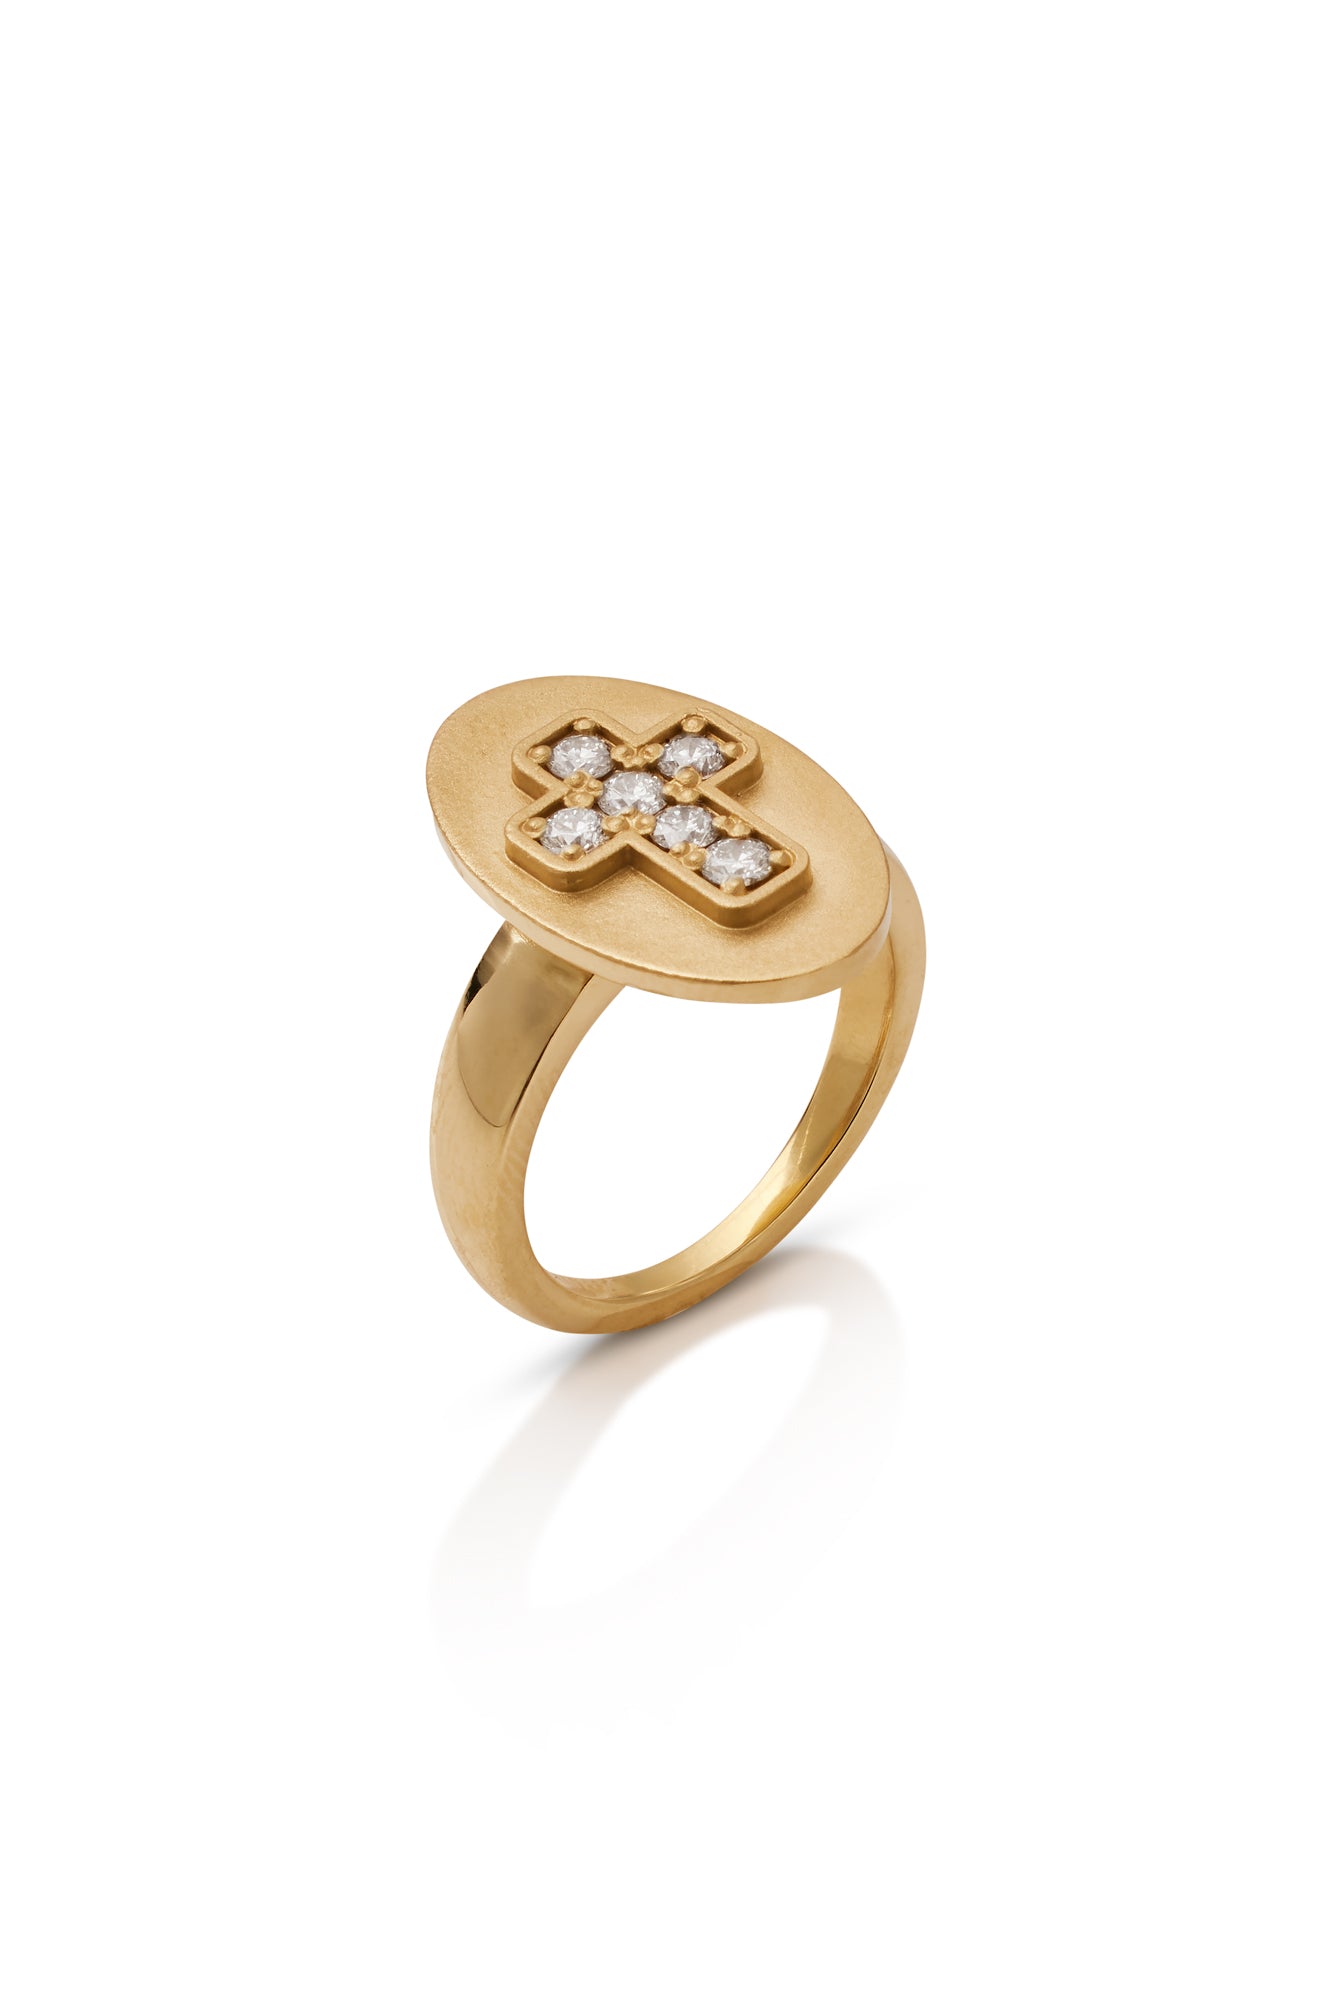 18KY Oval Ring with Diamond Cross